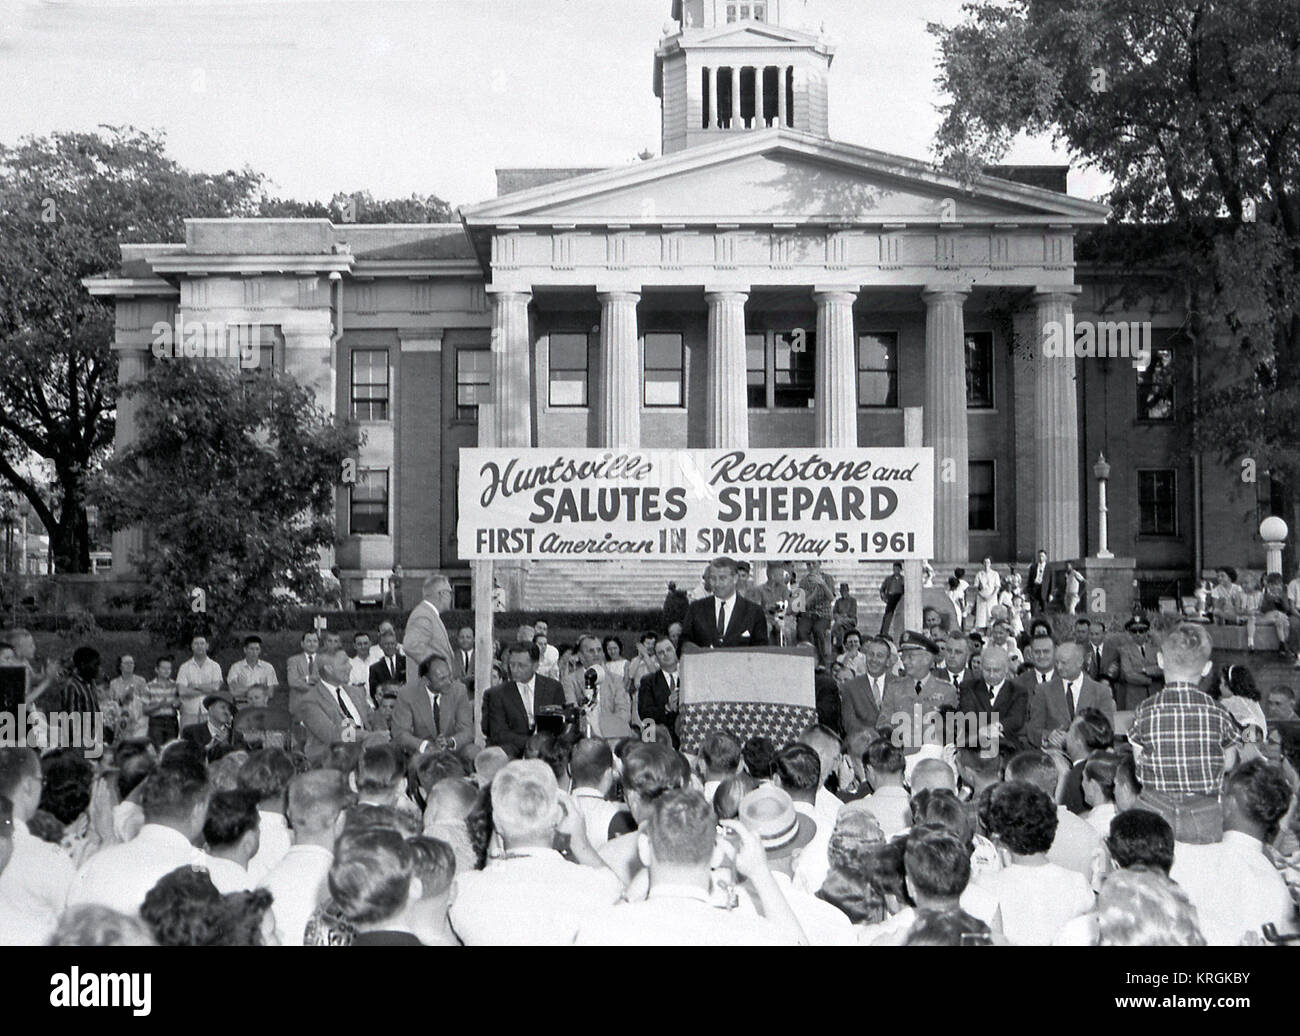 VonBraun, Wernher-Dr. Addresses a Crowd Celebrating In Front of the Madison Co. Al. Courthouse Following the Successful Launch of Astronaut Shepard,Alan ( America's First Astronaut In Space)On a Mercury-Redstone launch Vehicle.Freedom7, Shepard's Mercury Spacecraft, was Launched From Cape Canaveral. He reached a speed of 5100 MPH. His Flight Lasted 14.8 Minutes May 5, 1961 (MIX FILE) The Celebration for Freedom 7 at Huntsville, Alabama Stock Photo